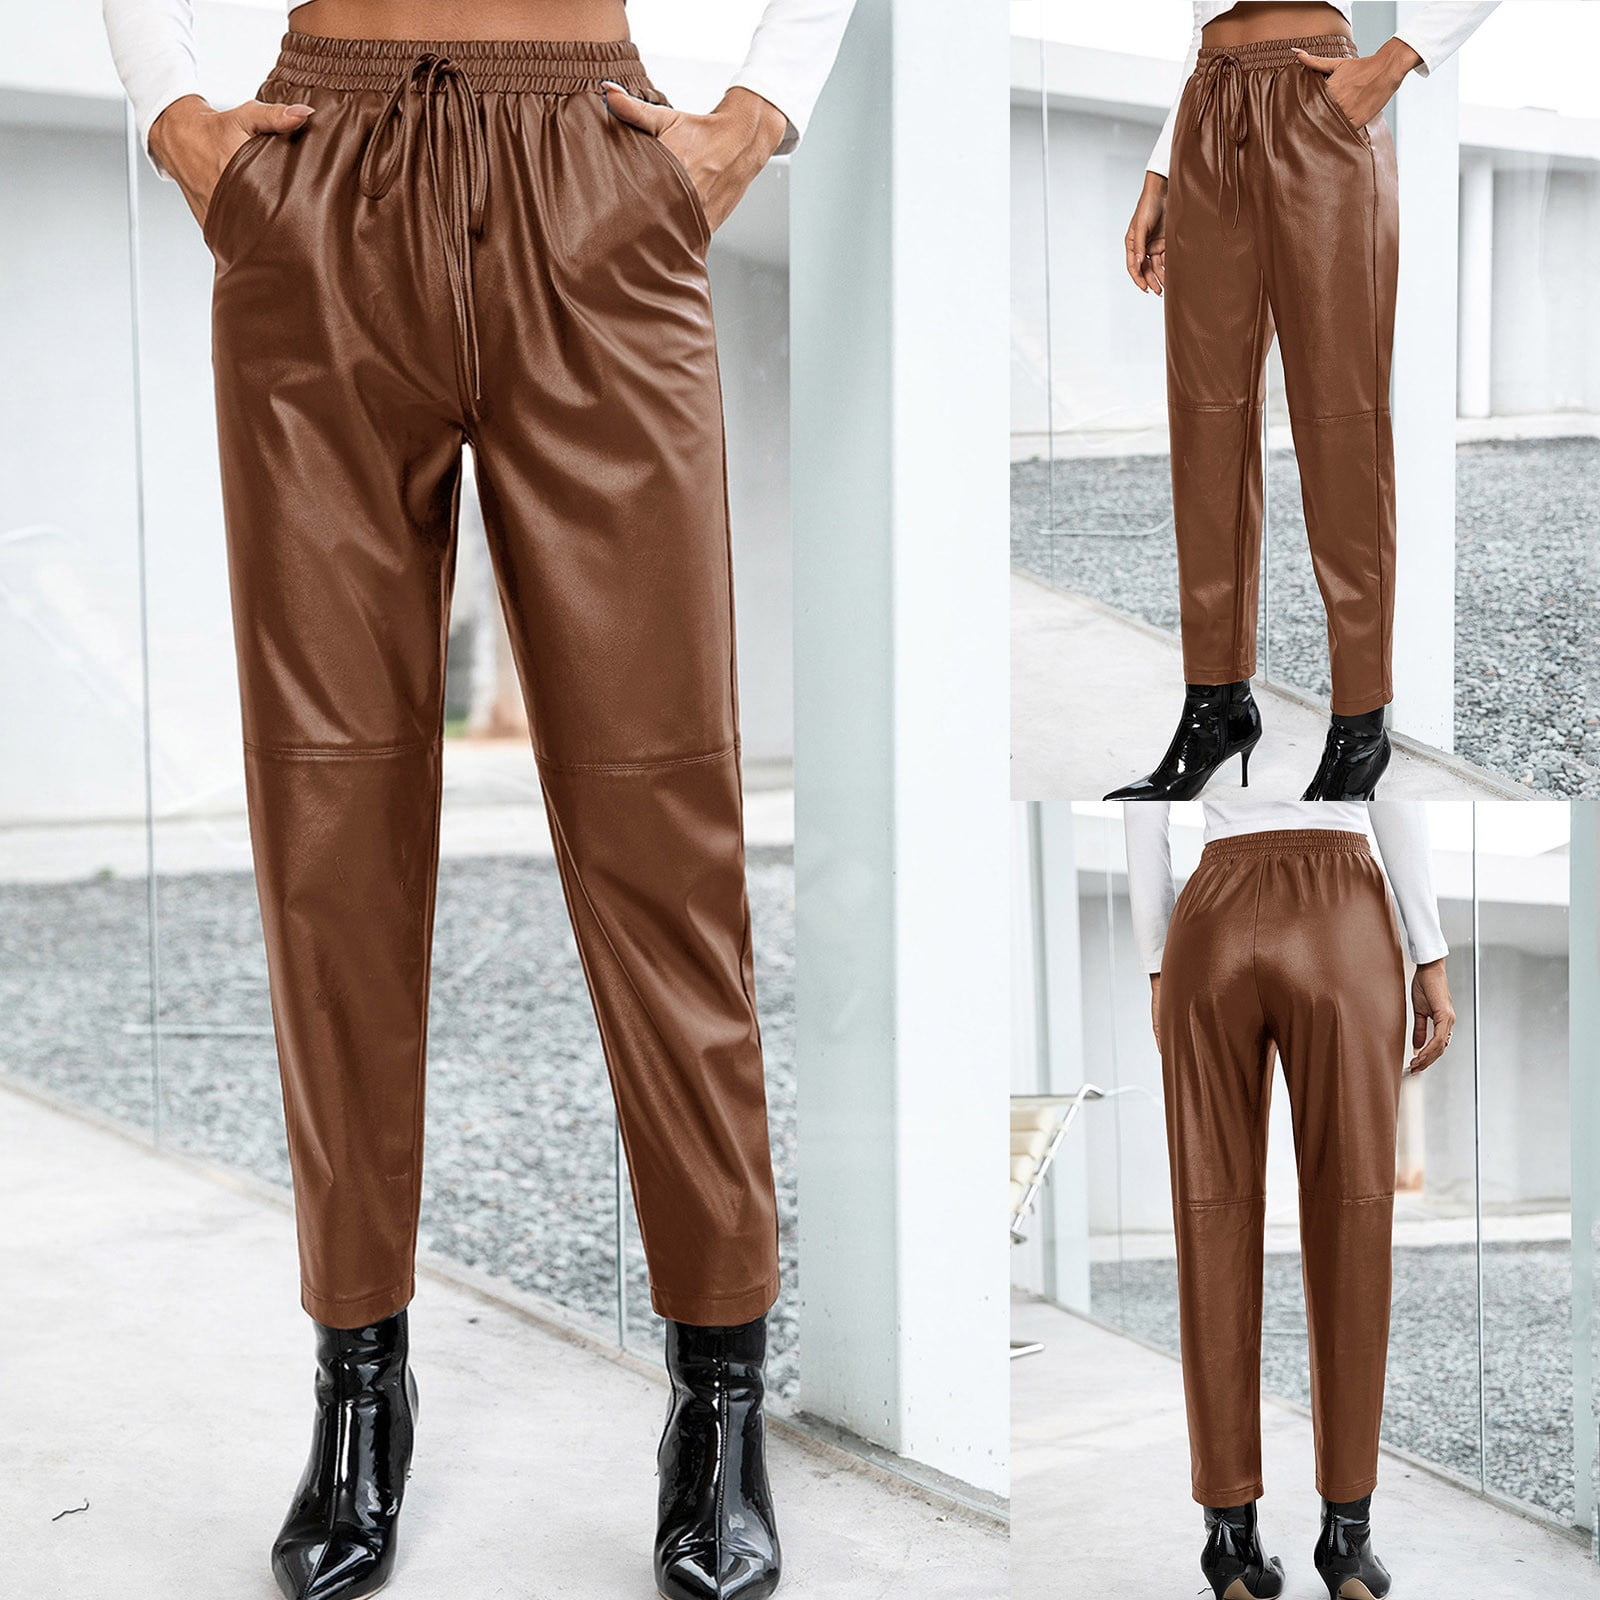 ASEIDFNSA Leather Pants for Women Size 6 Tall Spanks Leather